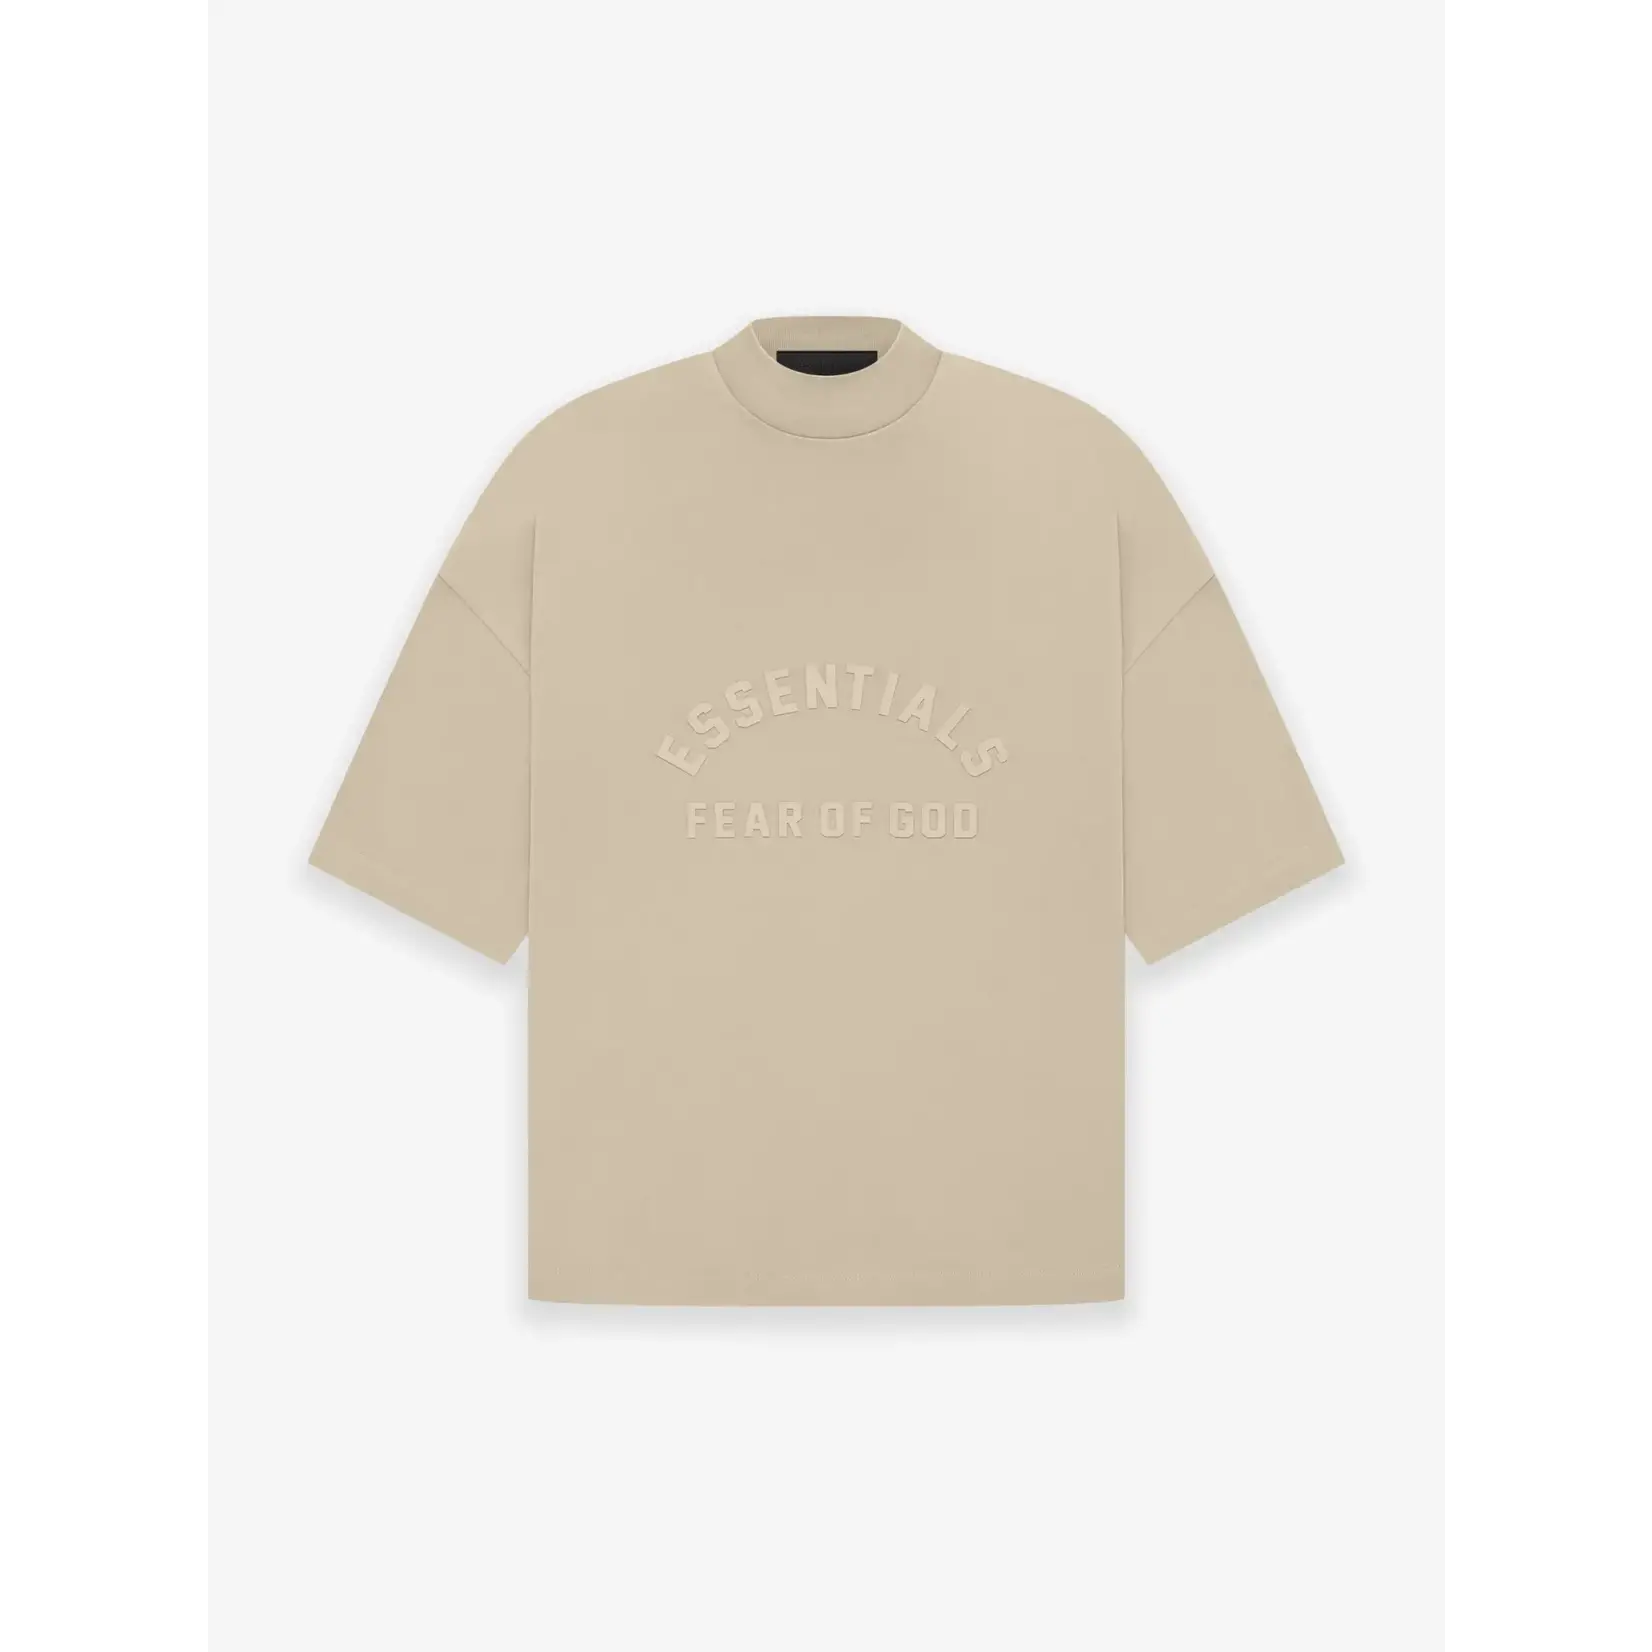 Fear Fear of God Essentials T Shirt Dusty Beige Size Large, DS BRAND NEW